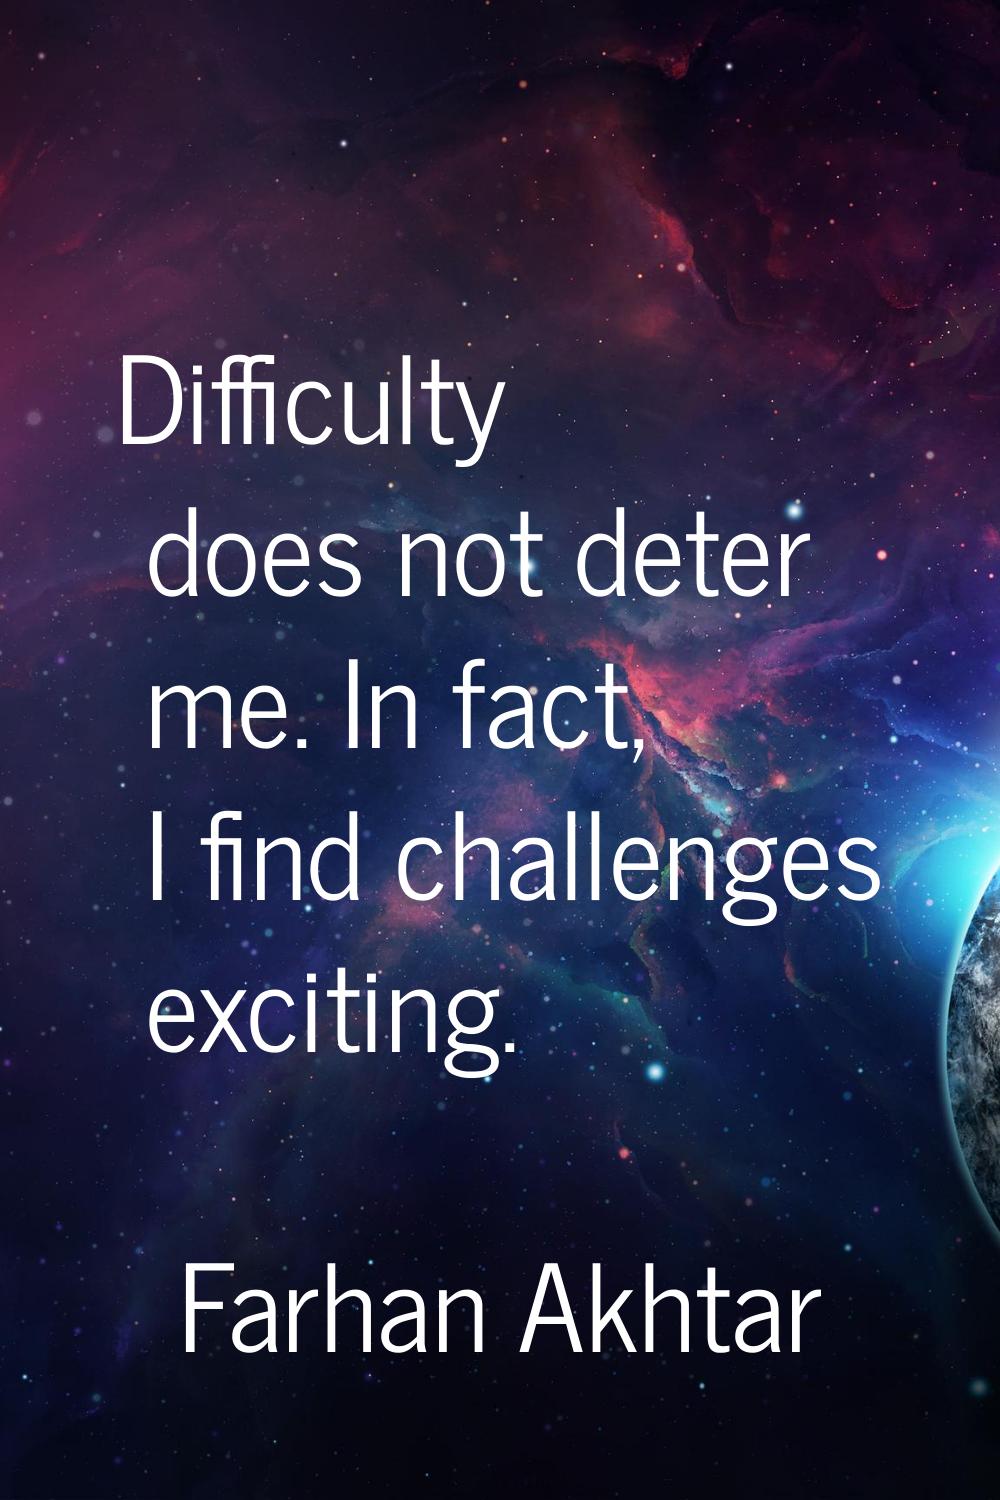 Difficulty does not deter me. In fact, I find challenges exciting.